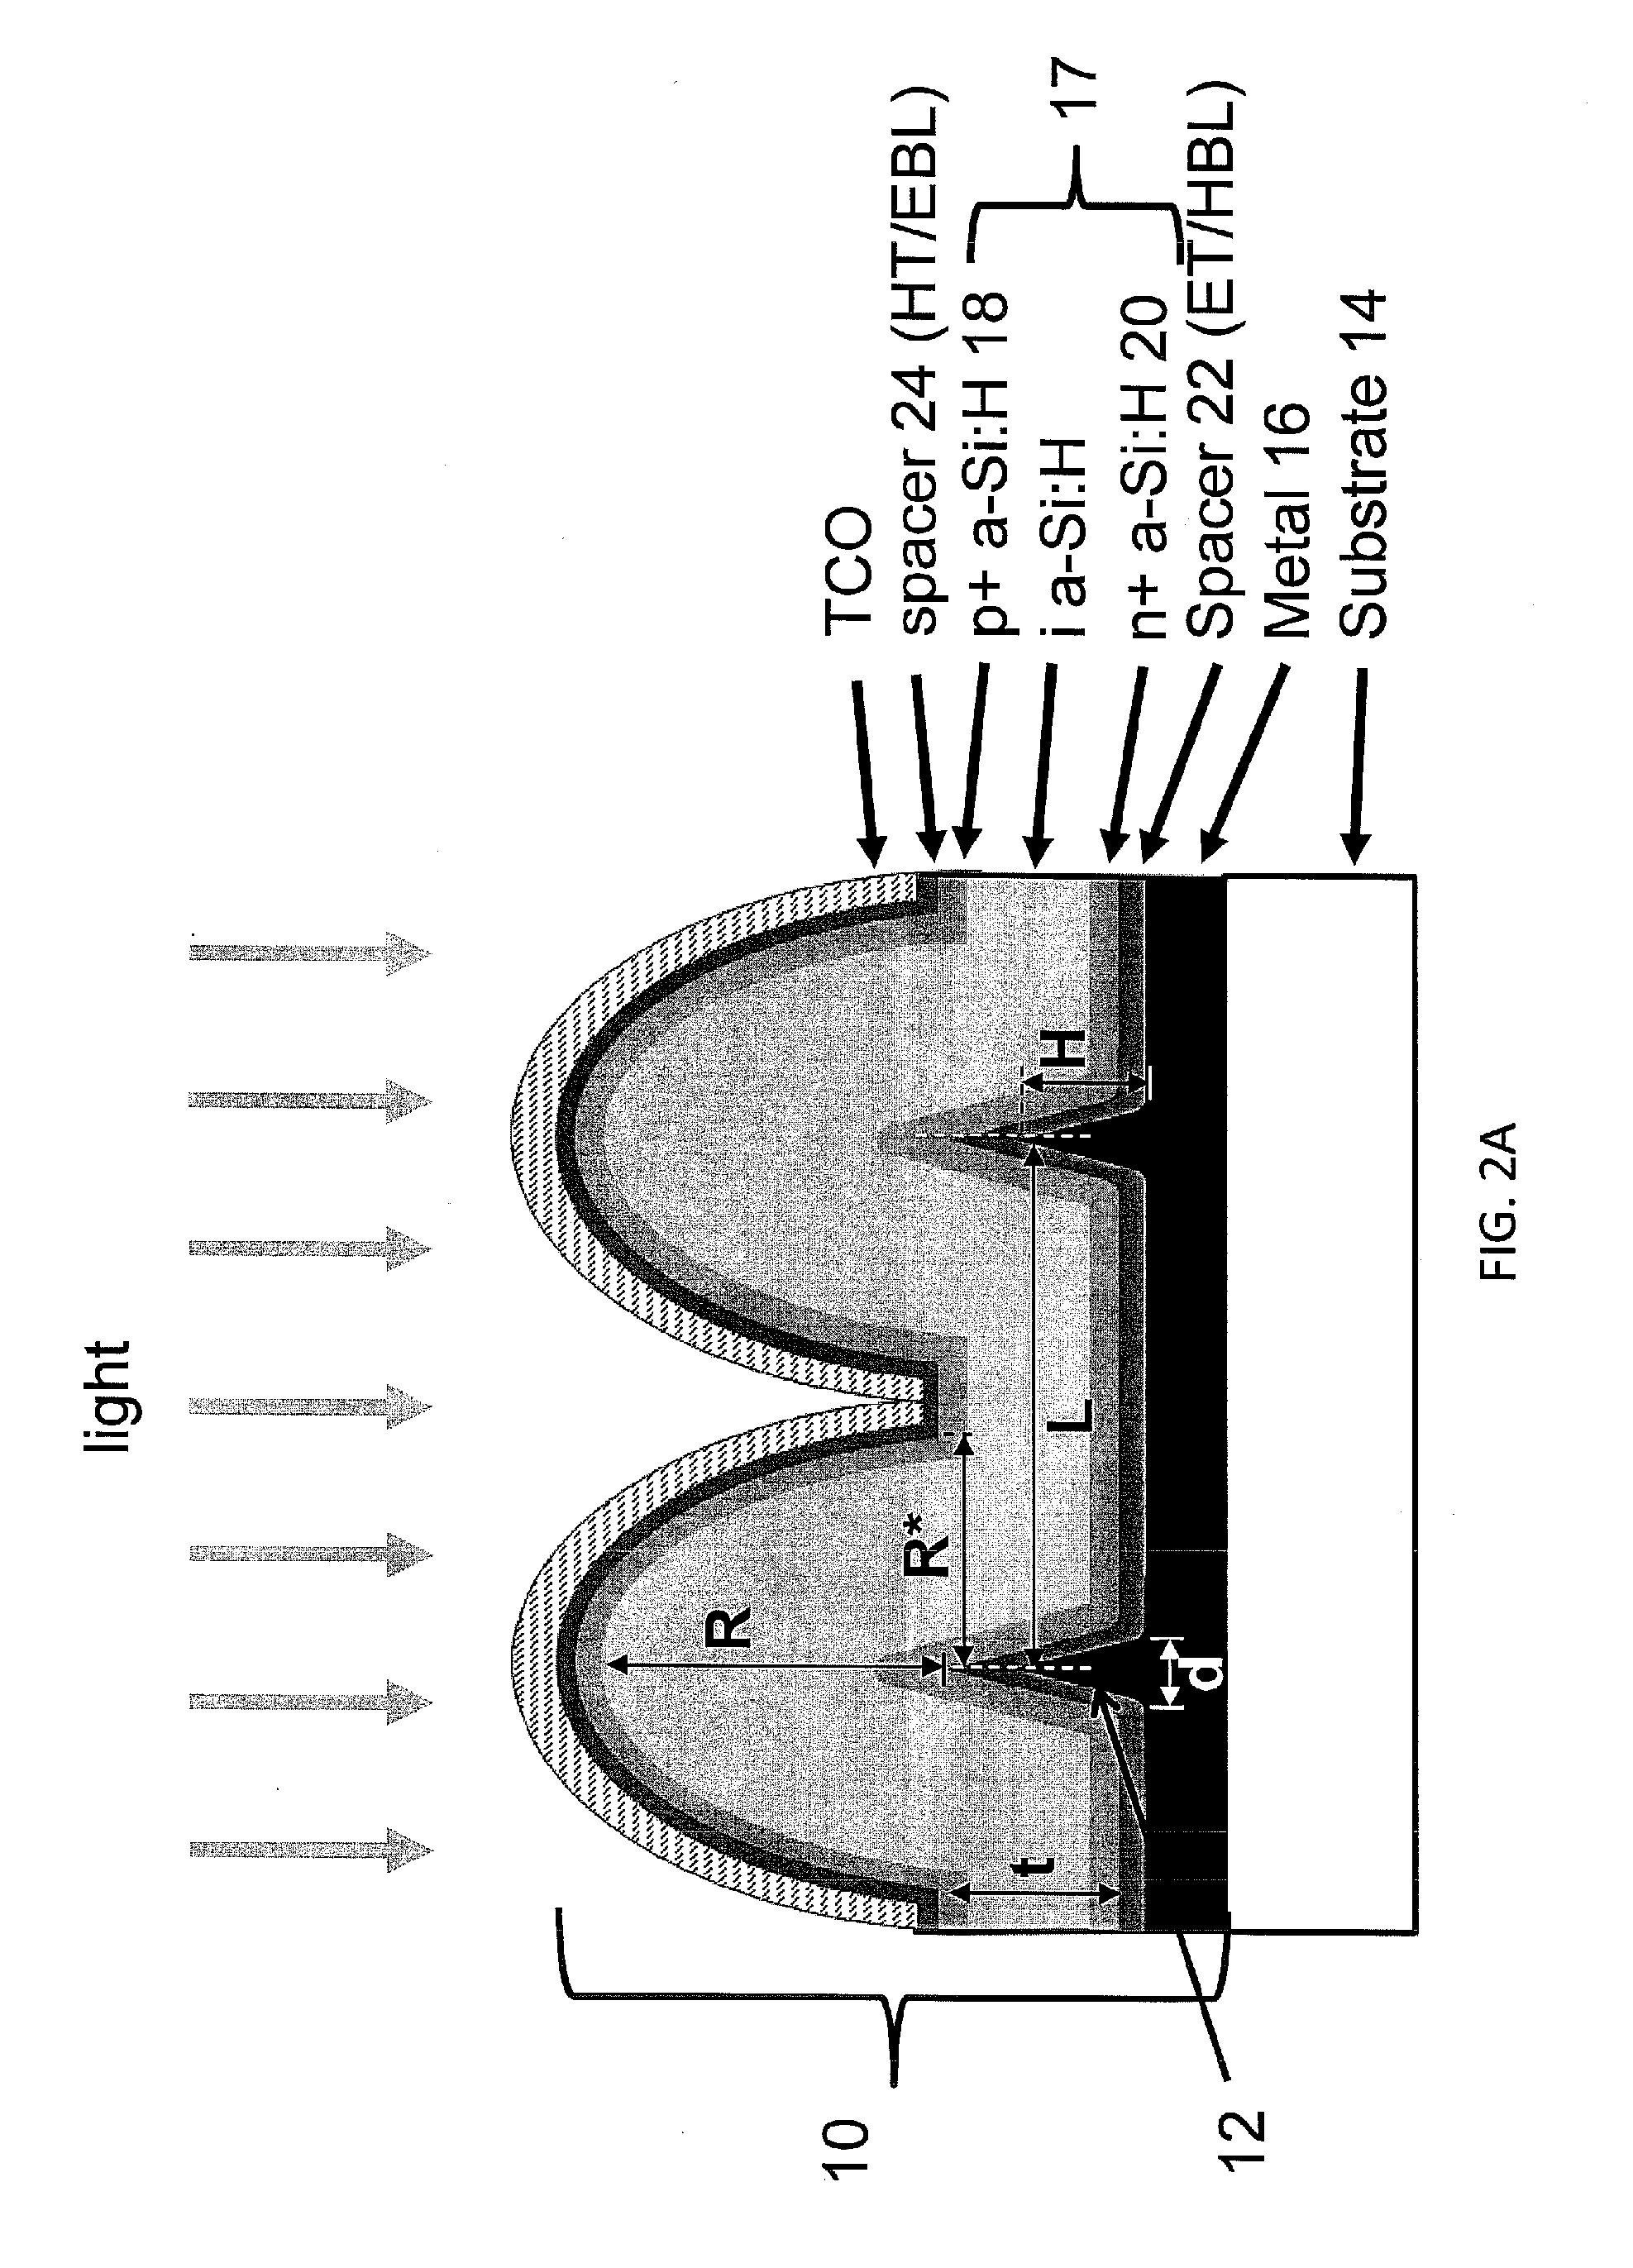 Single and multi-junction light and carrier collection management cells